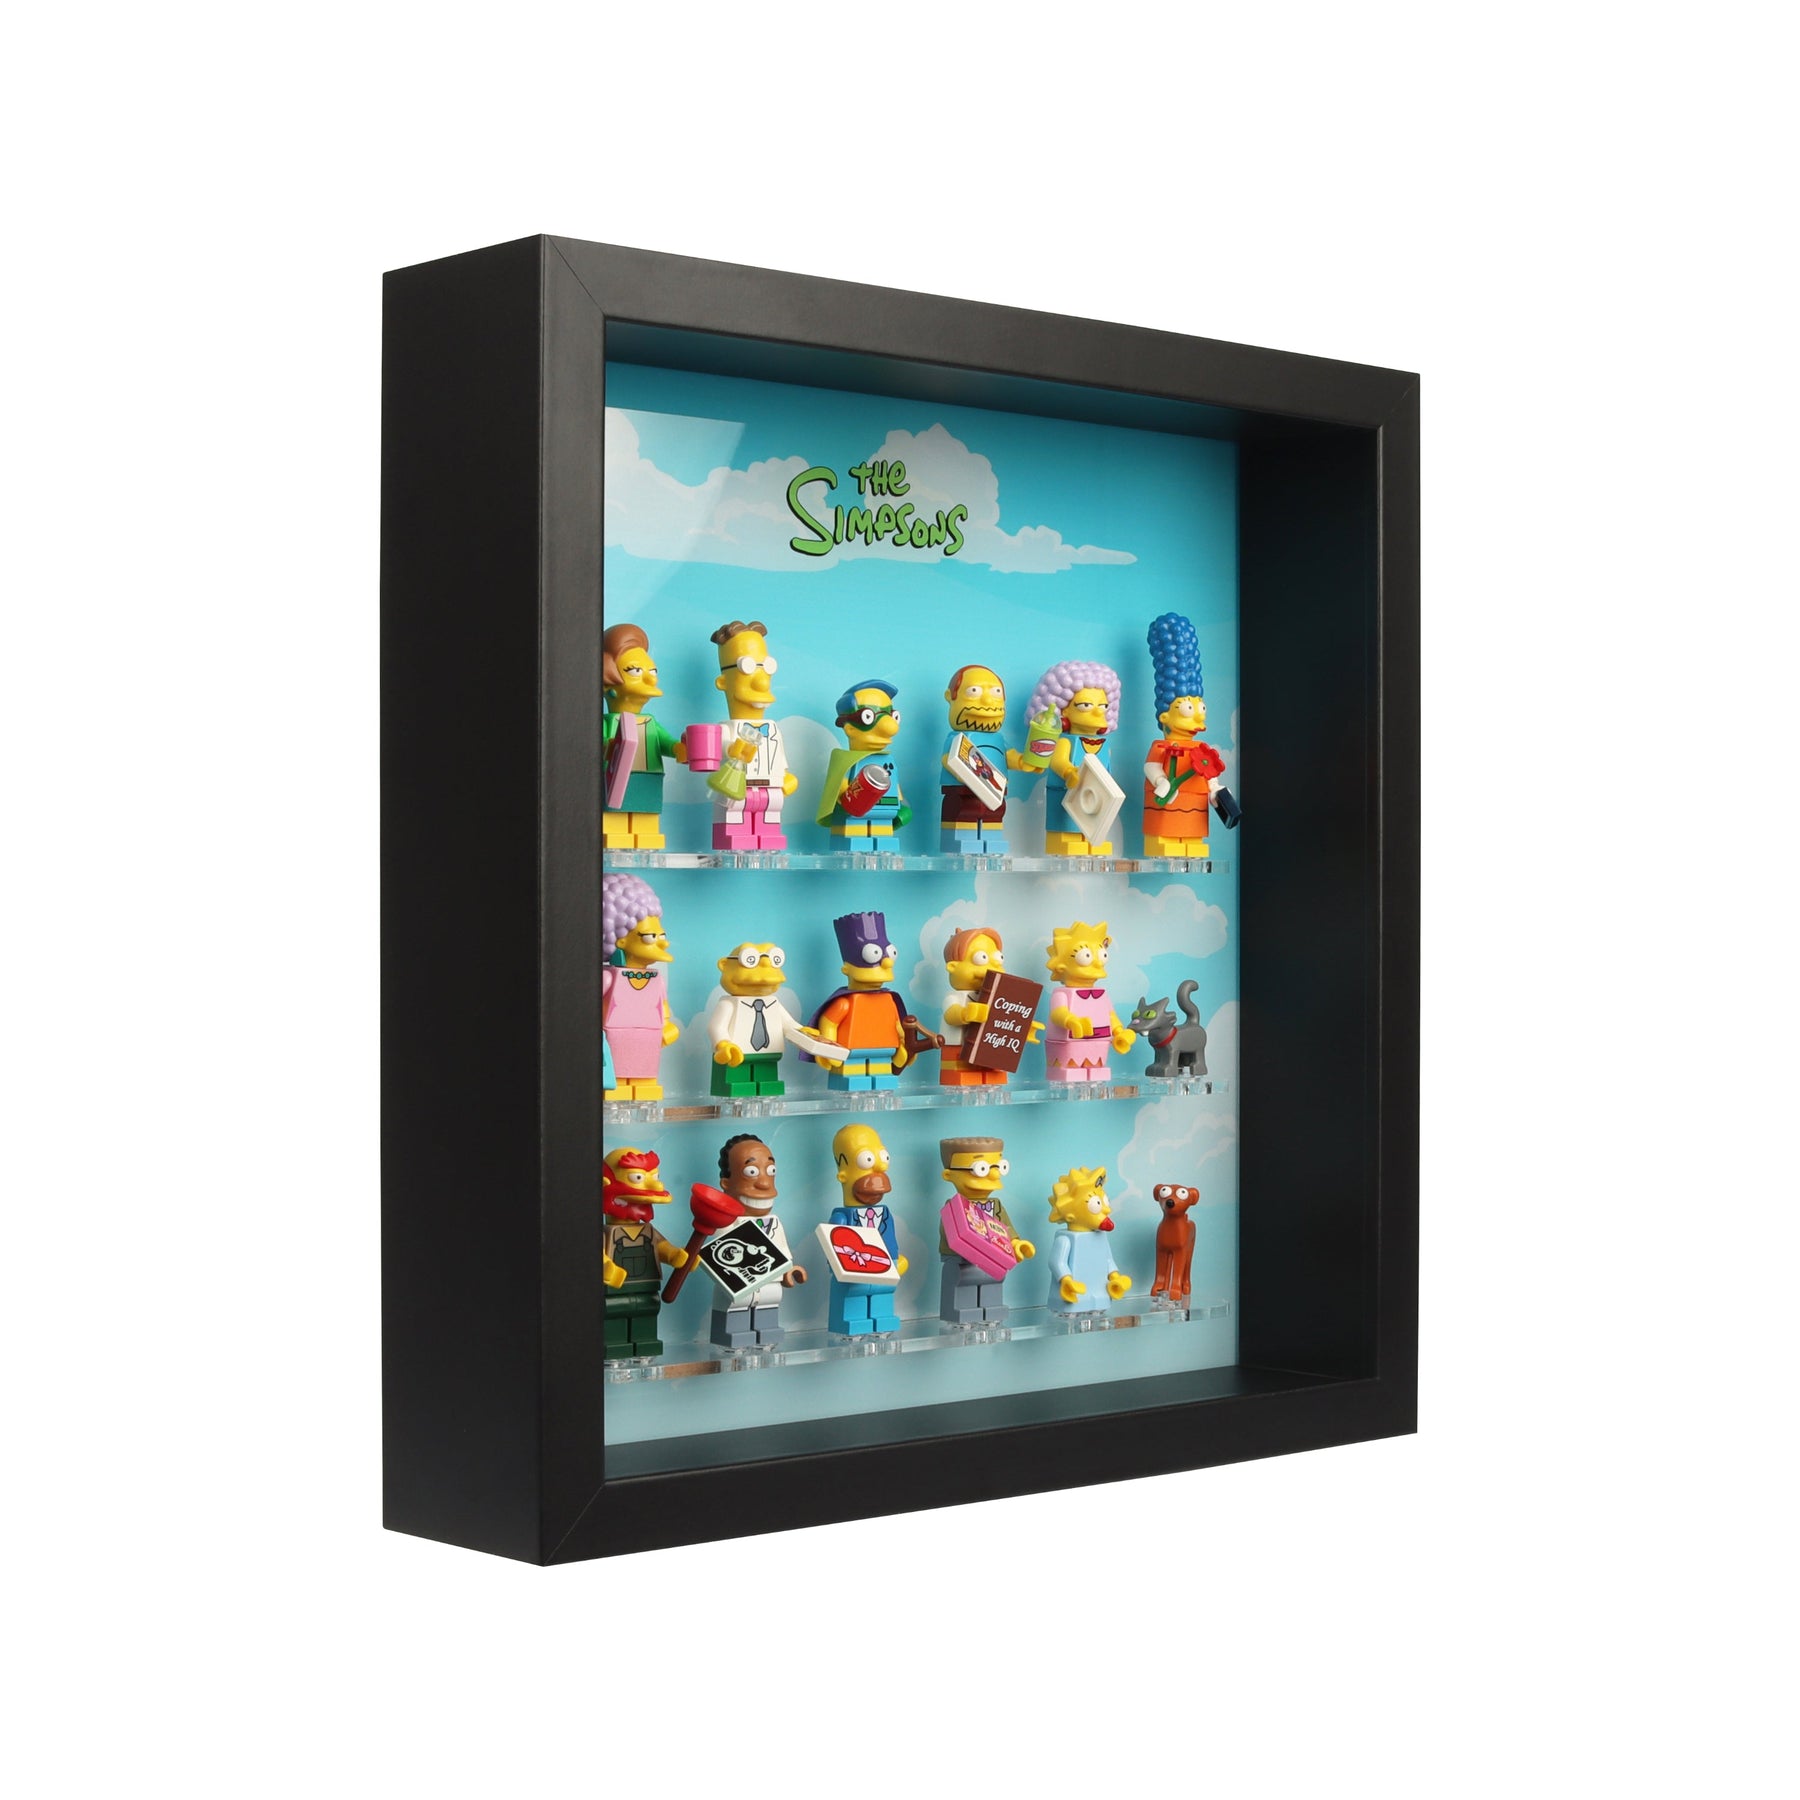 Lego 71009 Simpsons Series 2 Minifigure Display Case Insert for IKEA SANNAHED Frame (25x25cm)